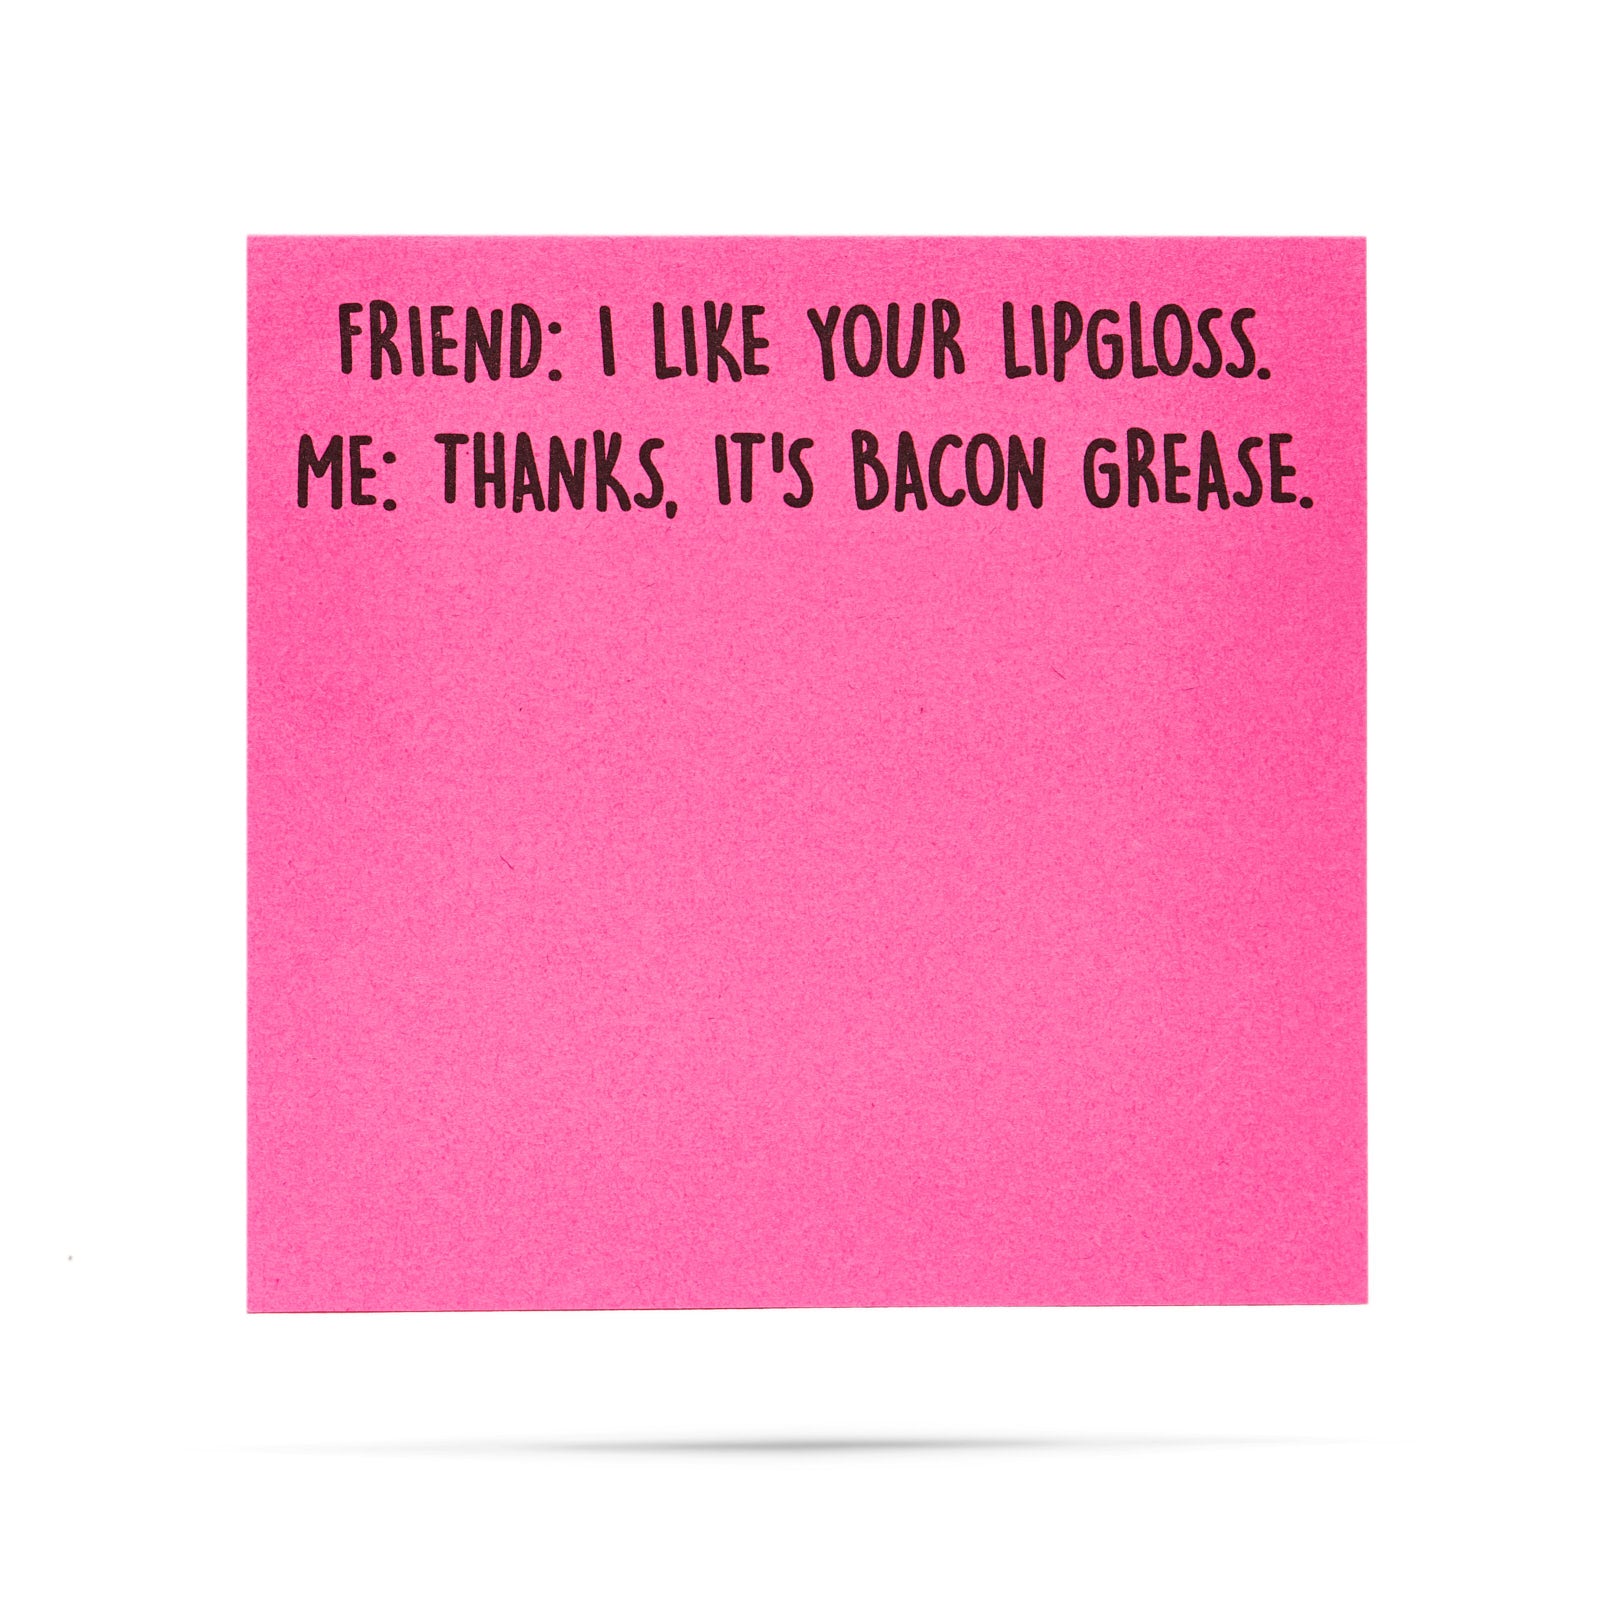 Friend: I like your lipgloss.  Me: Thanks, it's bacon grease. 100 sheet sticky note pad